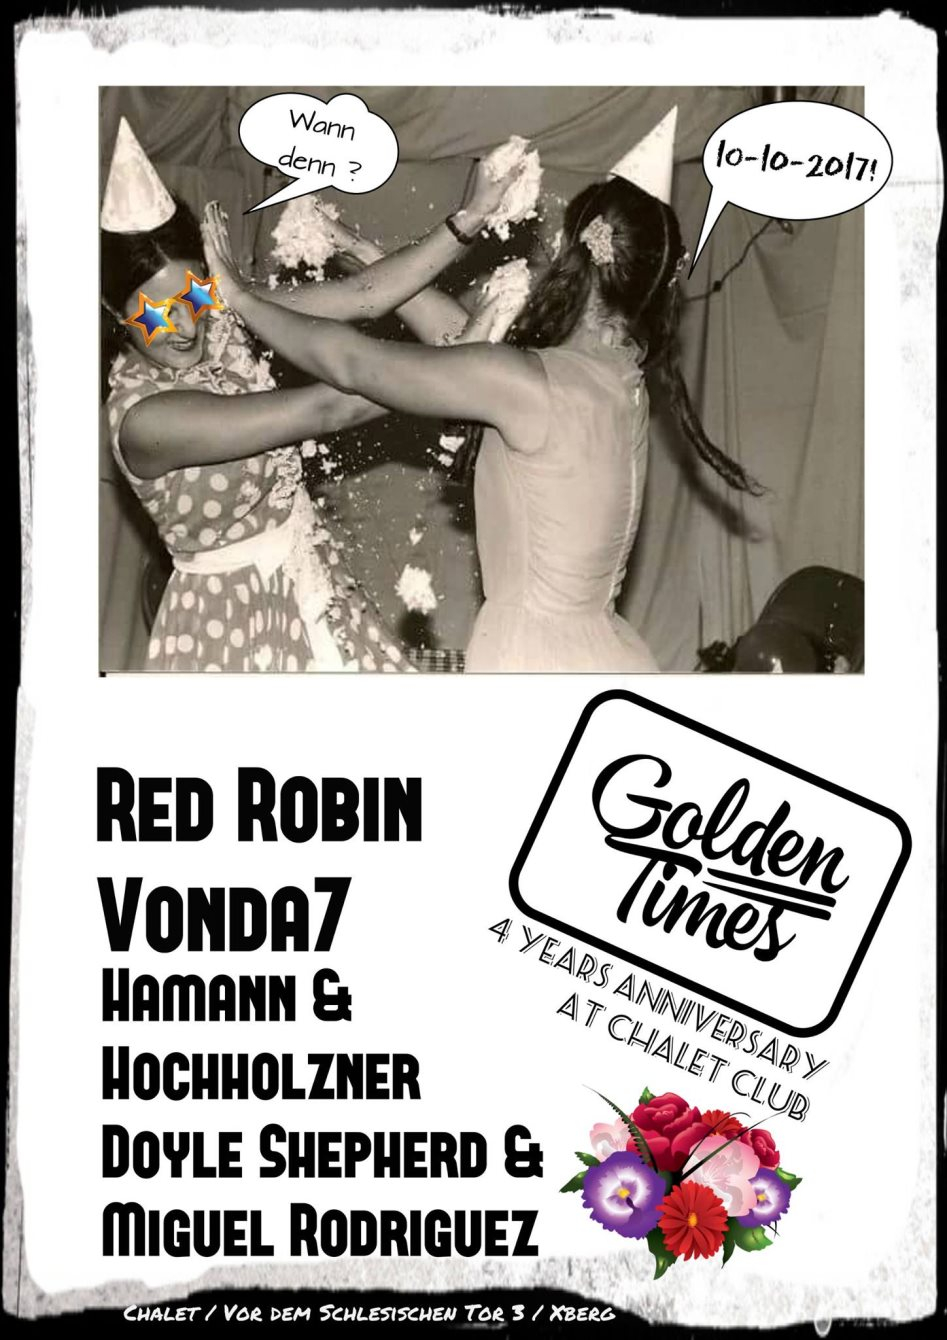 Golden Times 4 Years with Red Robin, VONDA7 & More - Flyer front